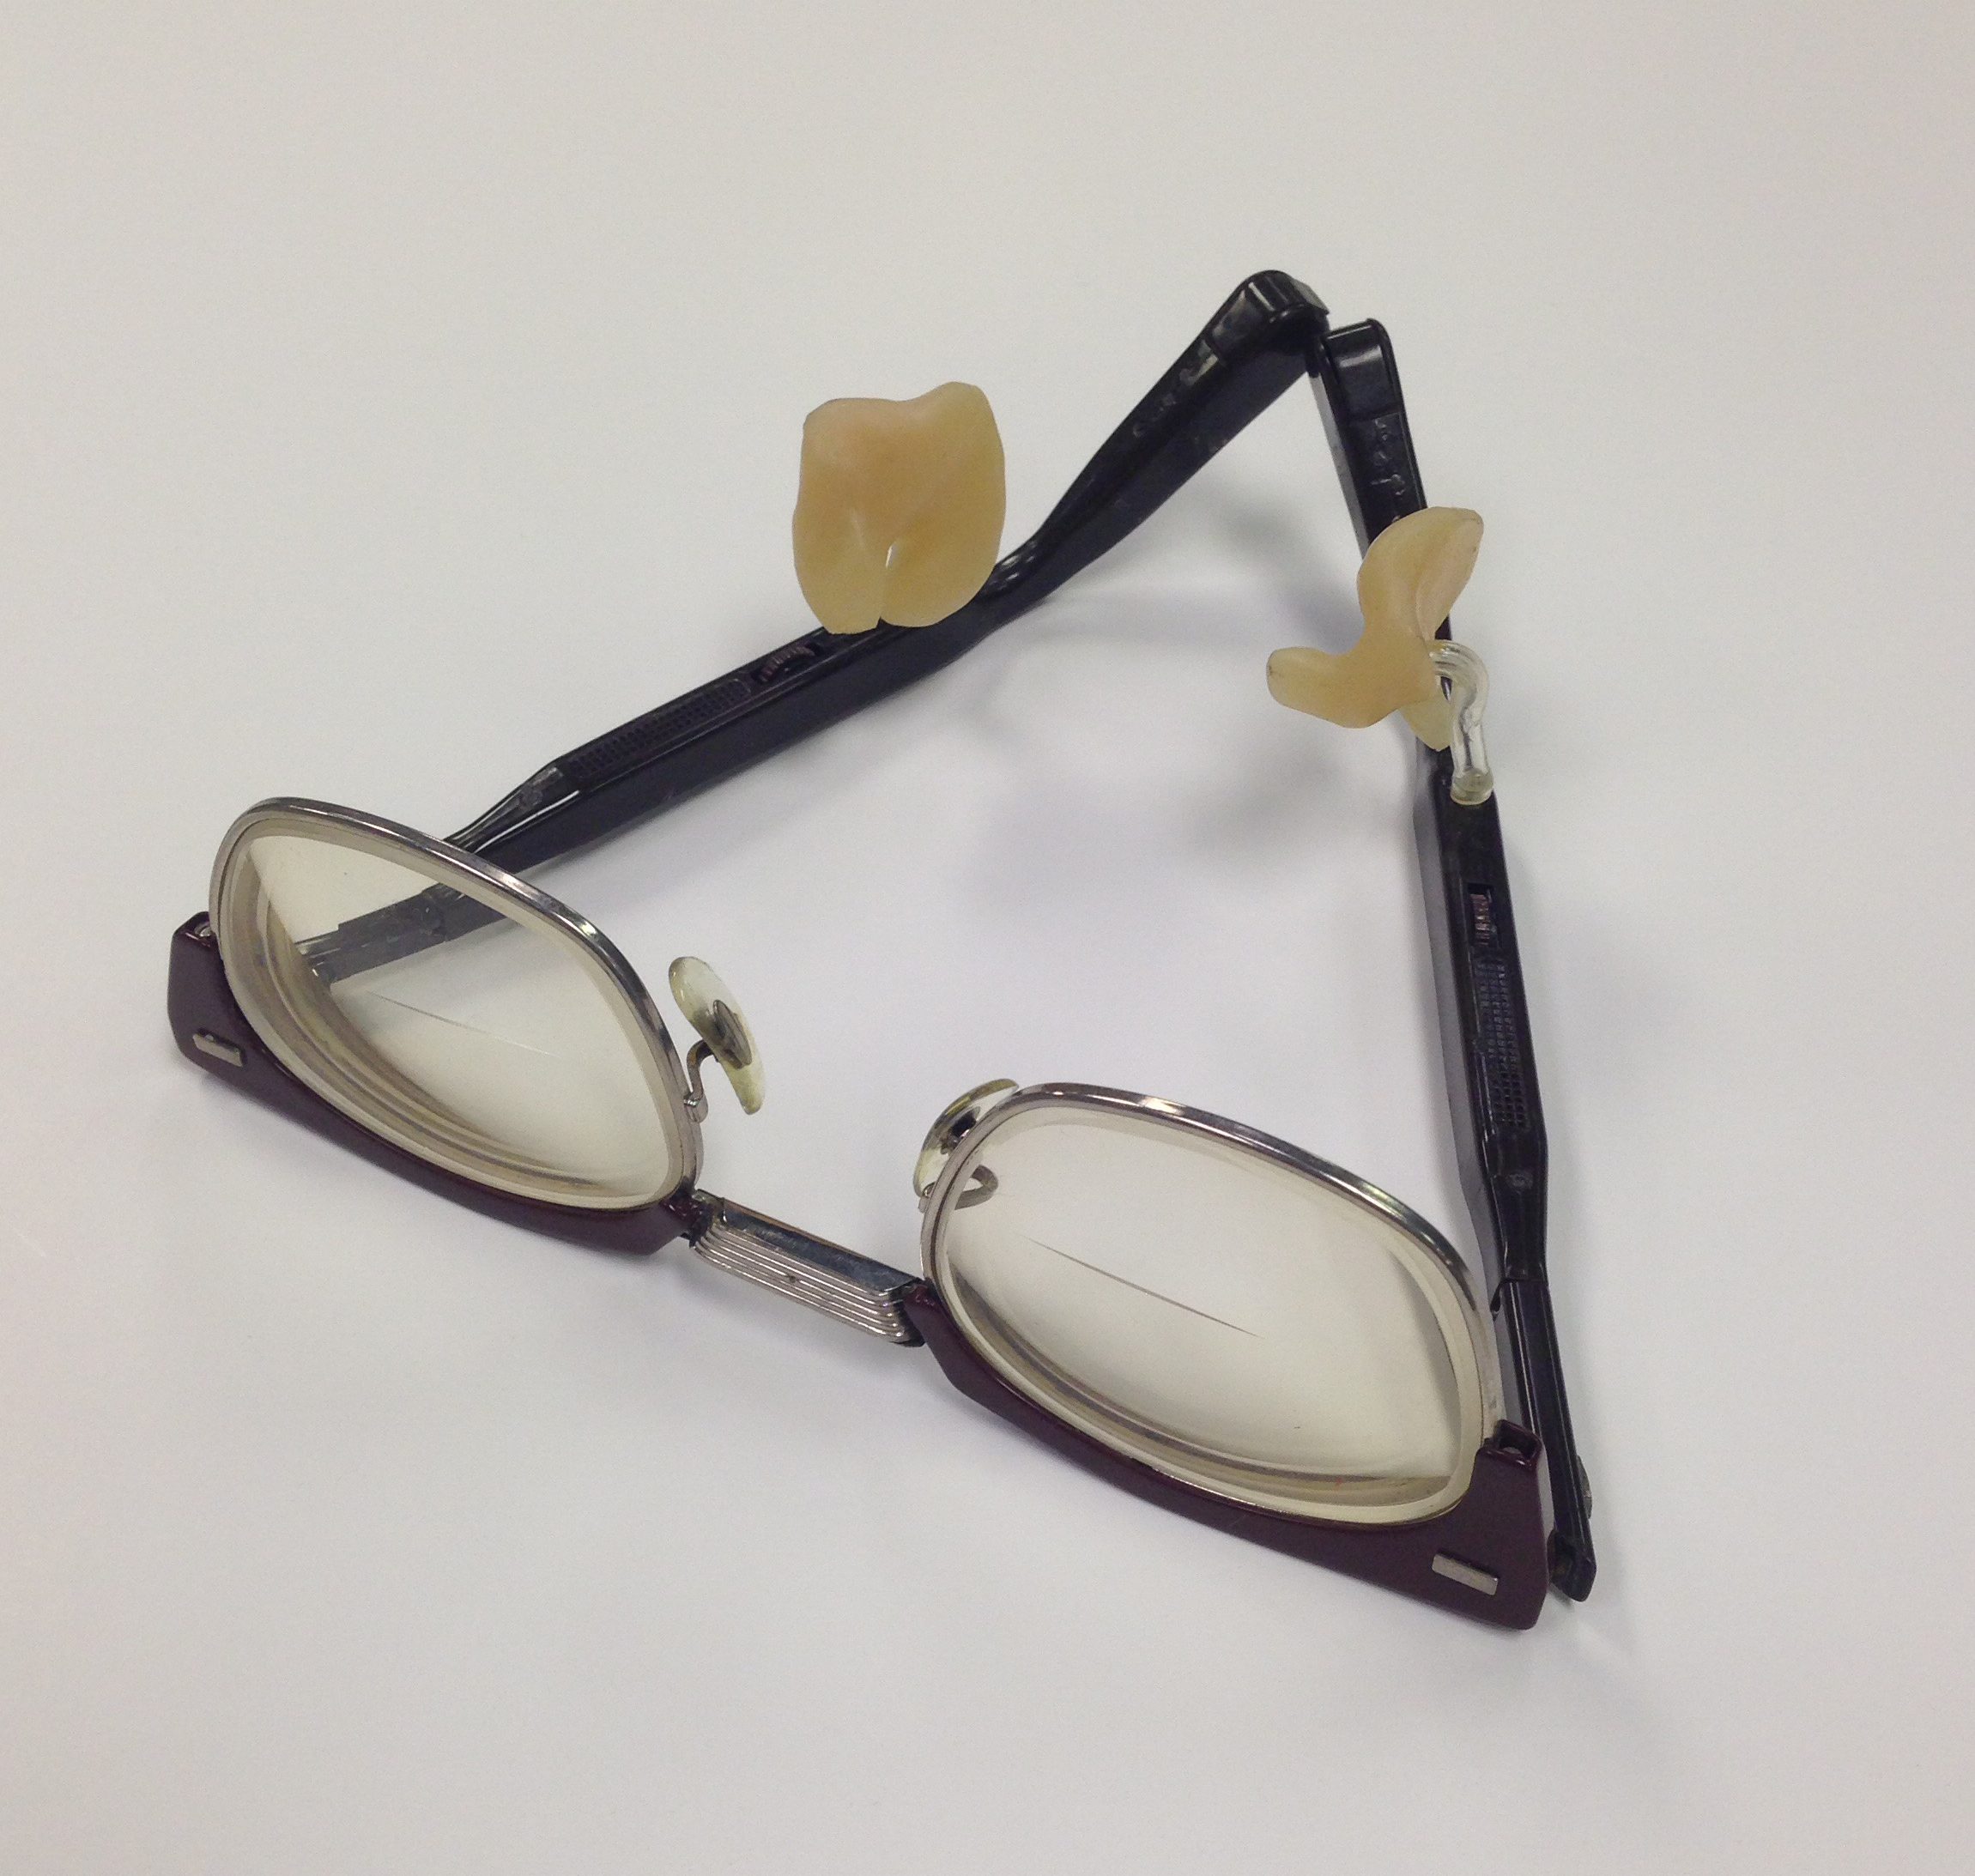 Glasses with built in hearing aids